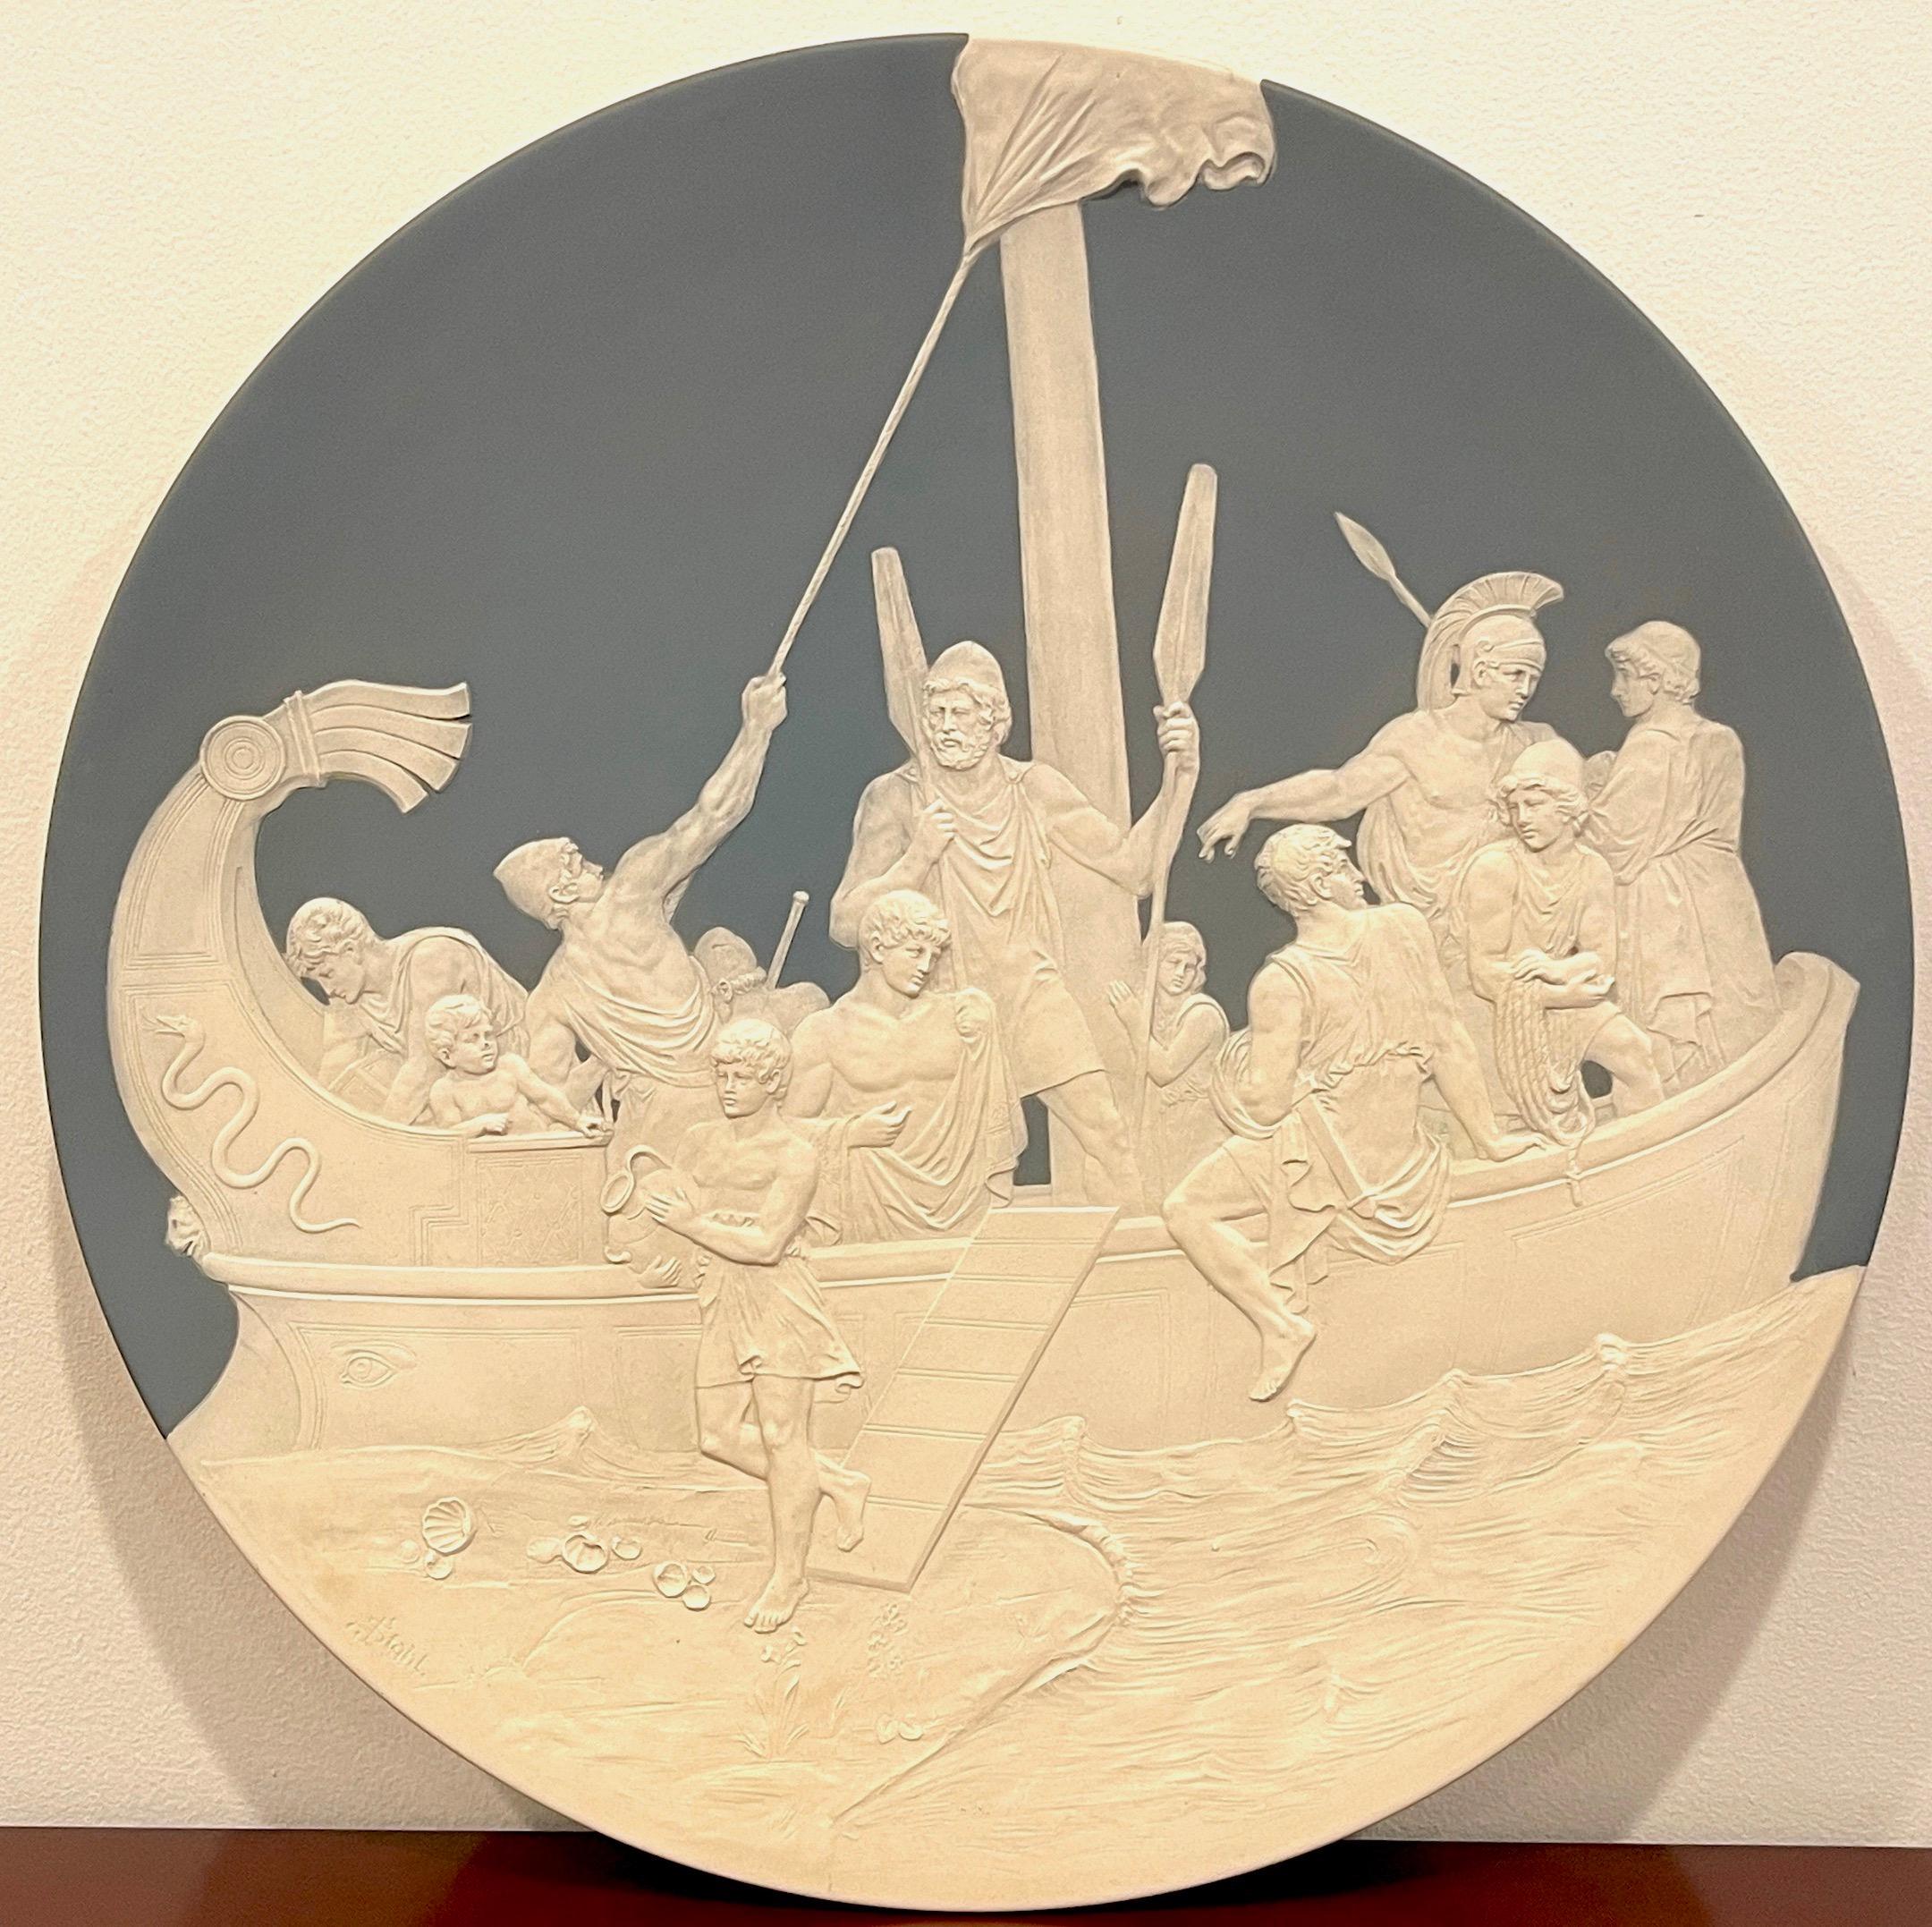 Jean Baptist Stahl Pate-sur-Pate/ Phanolith neoclassical charger of the argo
Germany, circa 1899
An exceptional large pâte-sur-pâte/ phanolith Neoclassical charger/plaque depicting the Greek mythology story of Jason and eleven argonauts on the